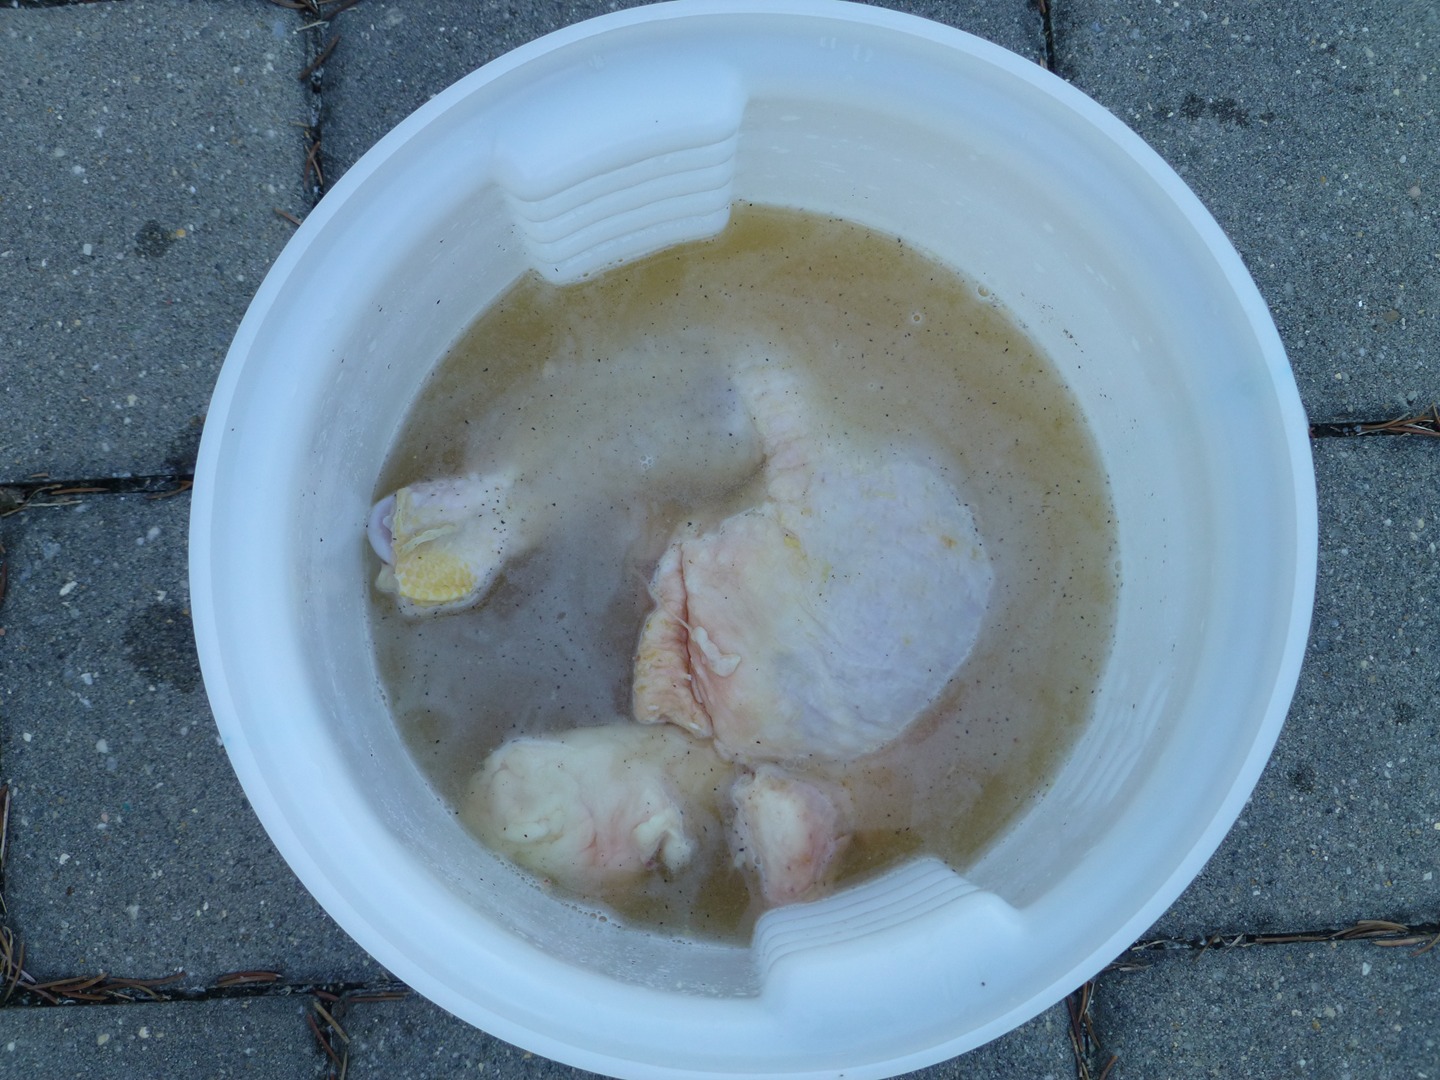 The Briner - The Ultimate Turkey Brine Container